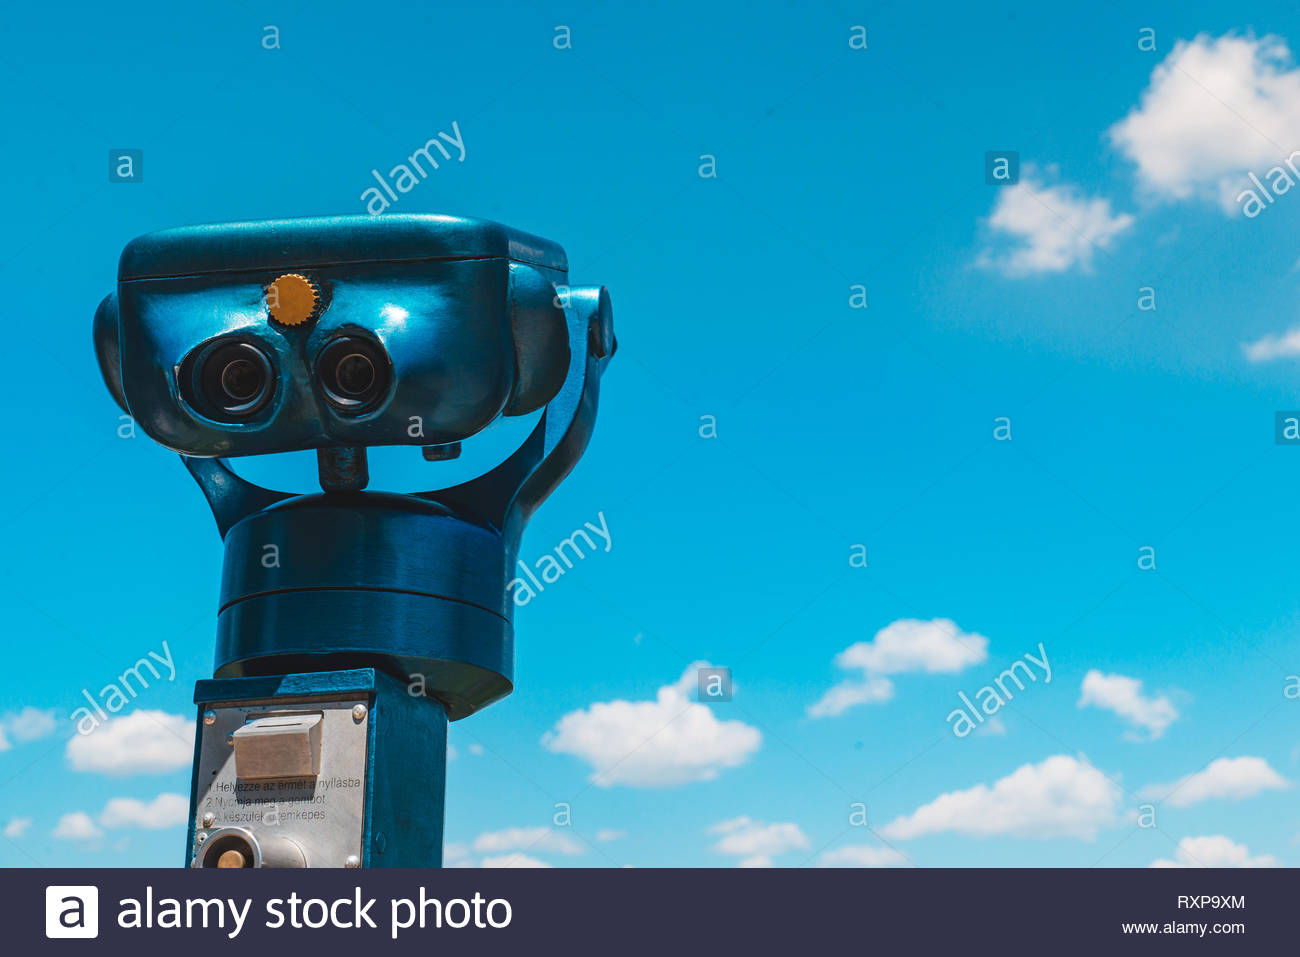 Observation Deck Binoculars Blue Sky With Clouds On Background